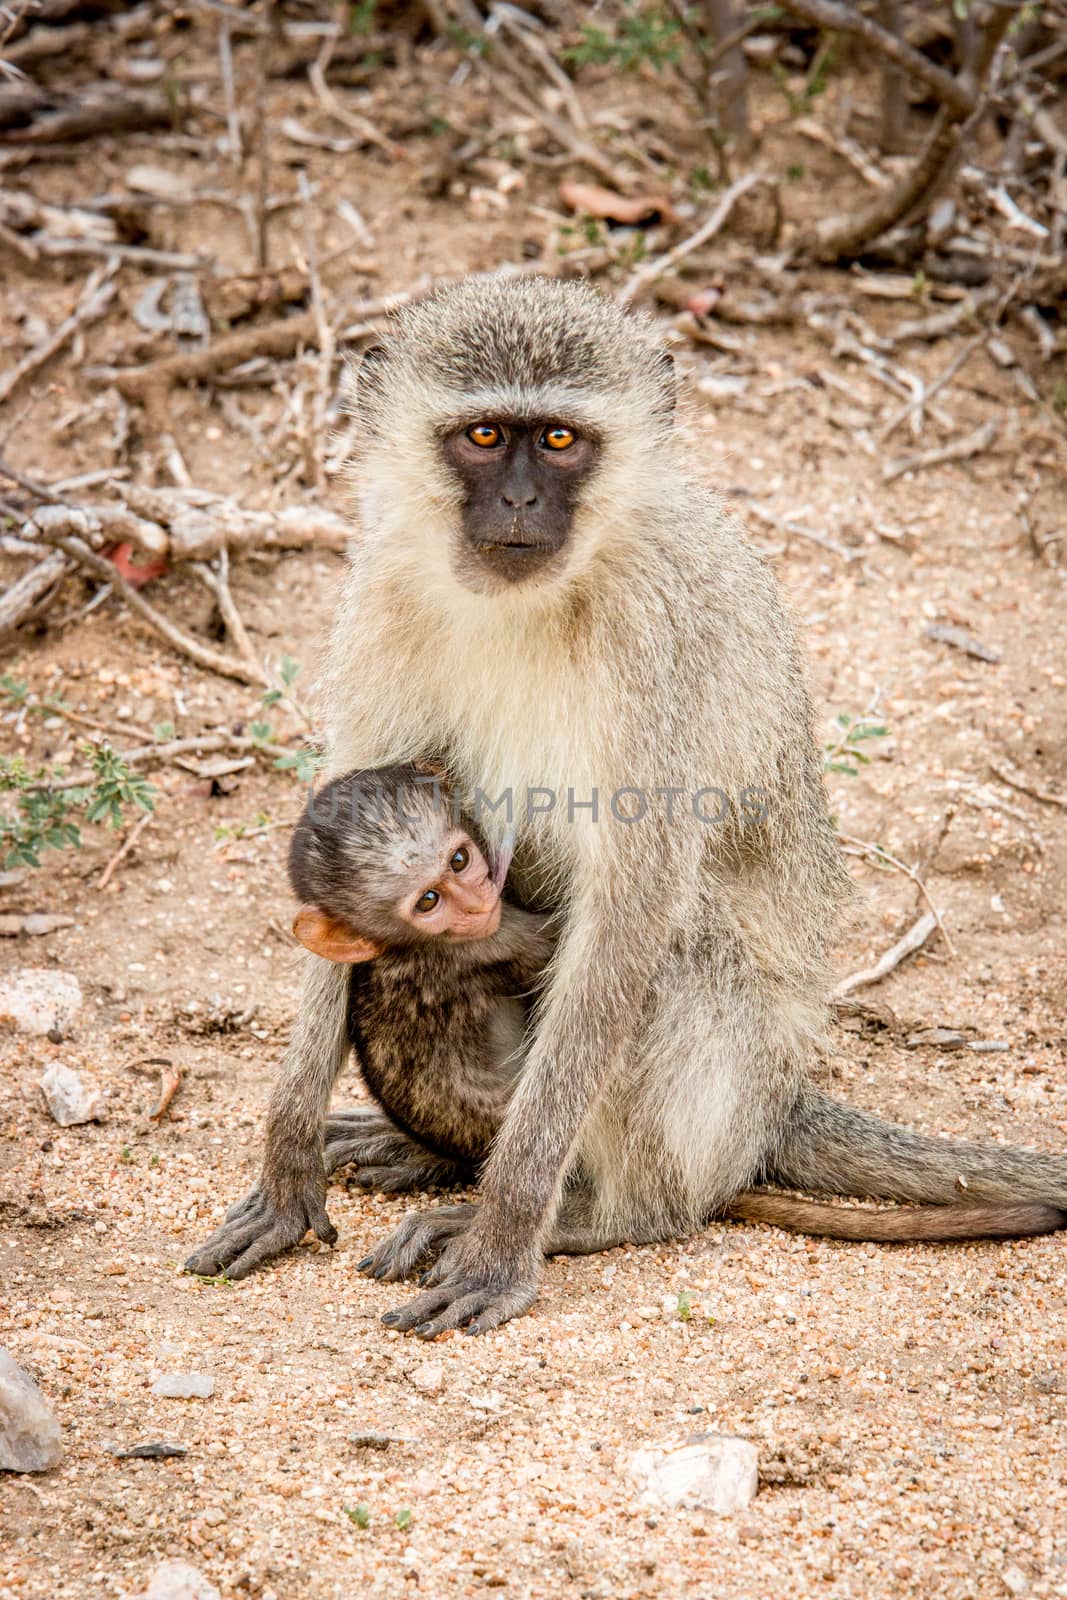 Vervet monkey with a baby in the Kruger National Park, South Africa. by Simoneemanphotography